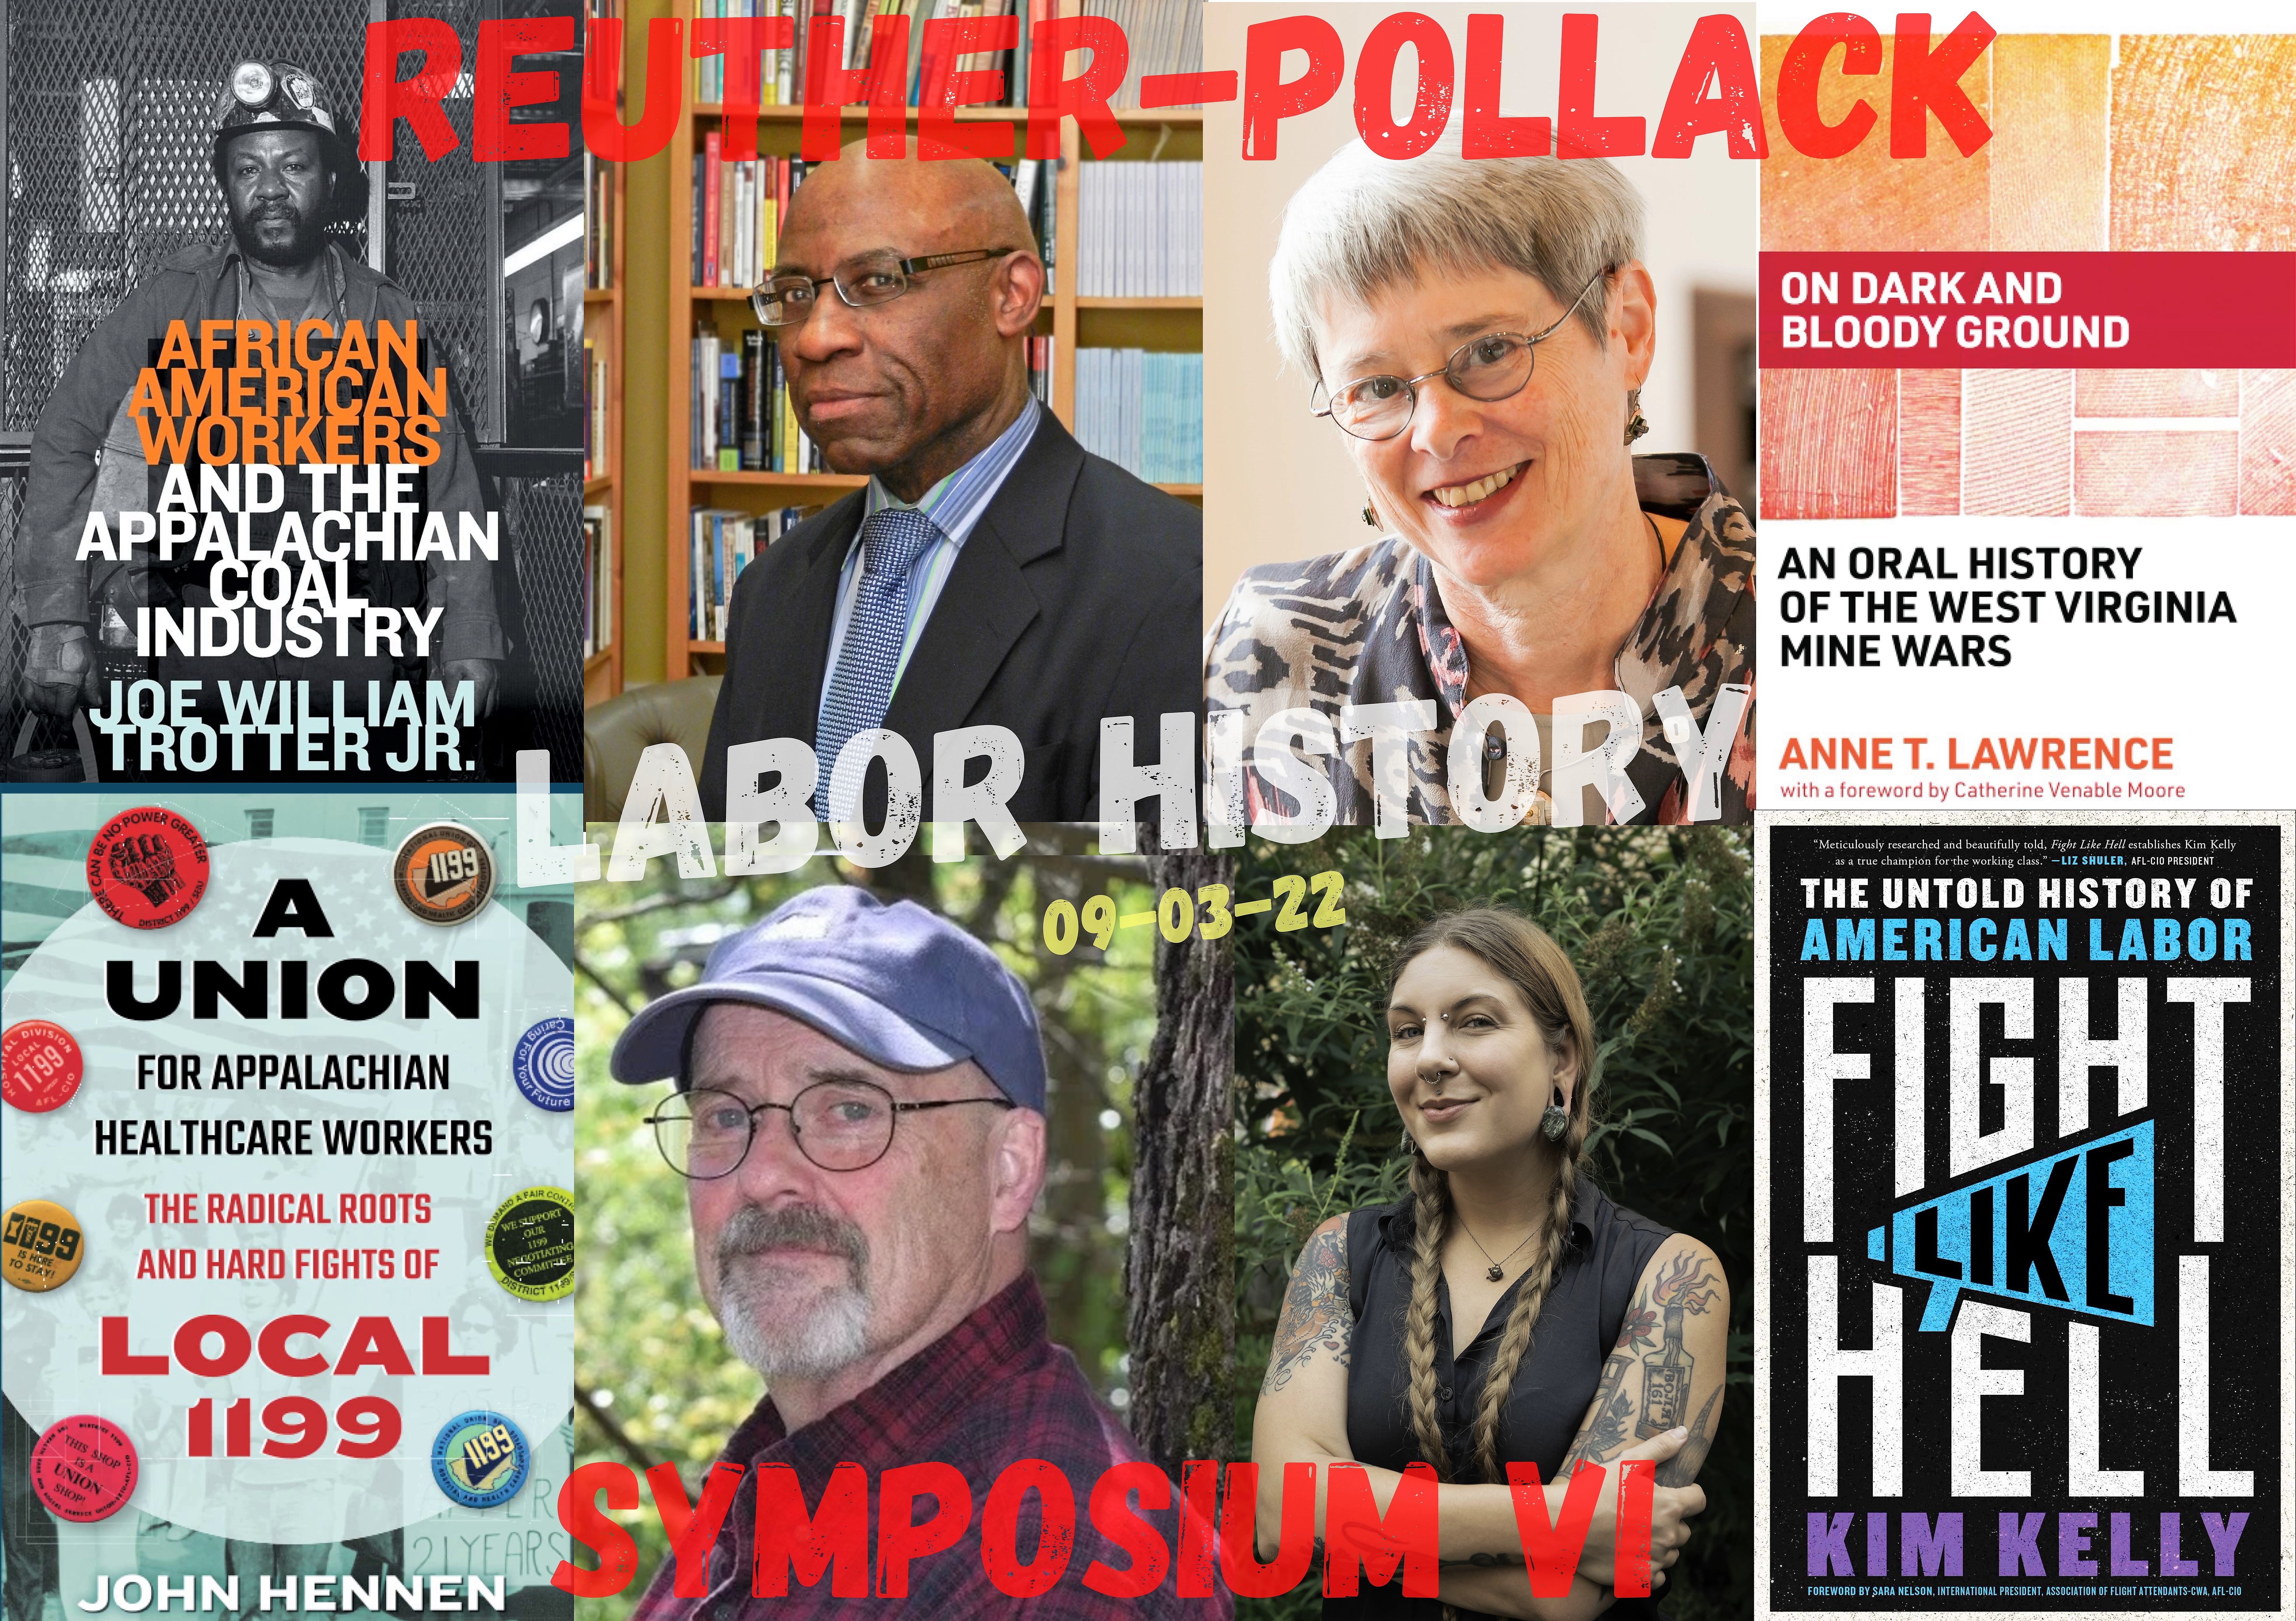 Reuther-Pollack Labor History Symposium 6 Sept. 3, 2022